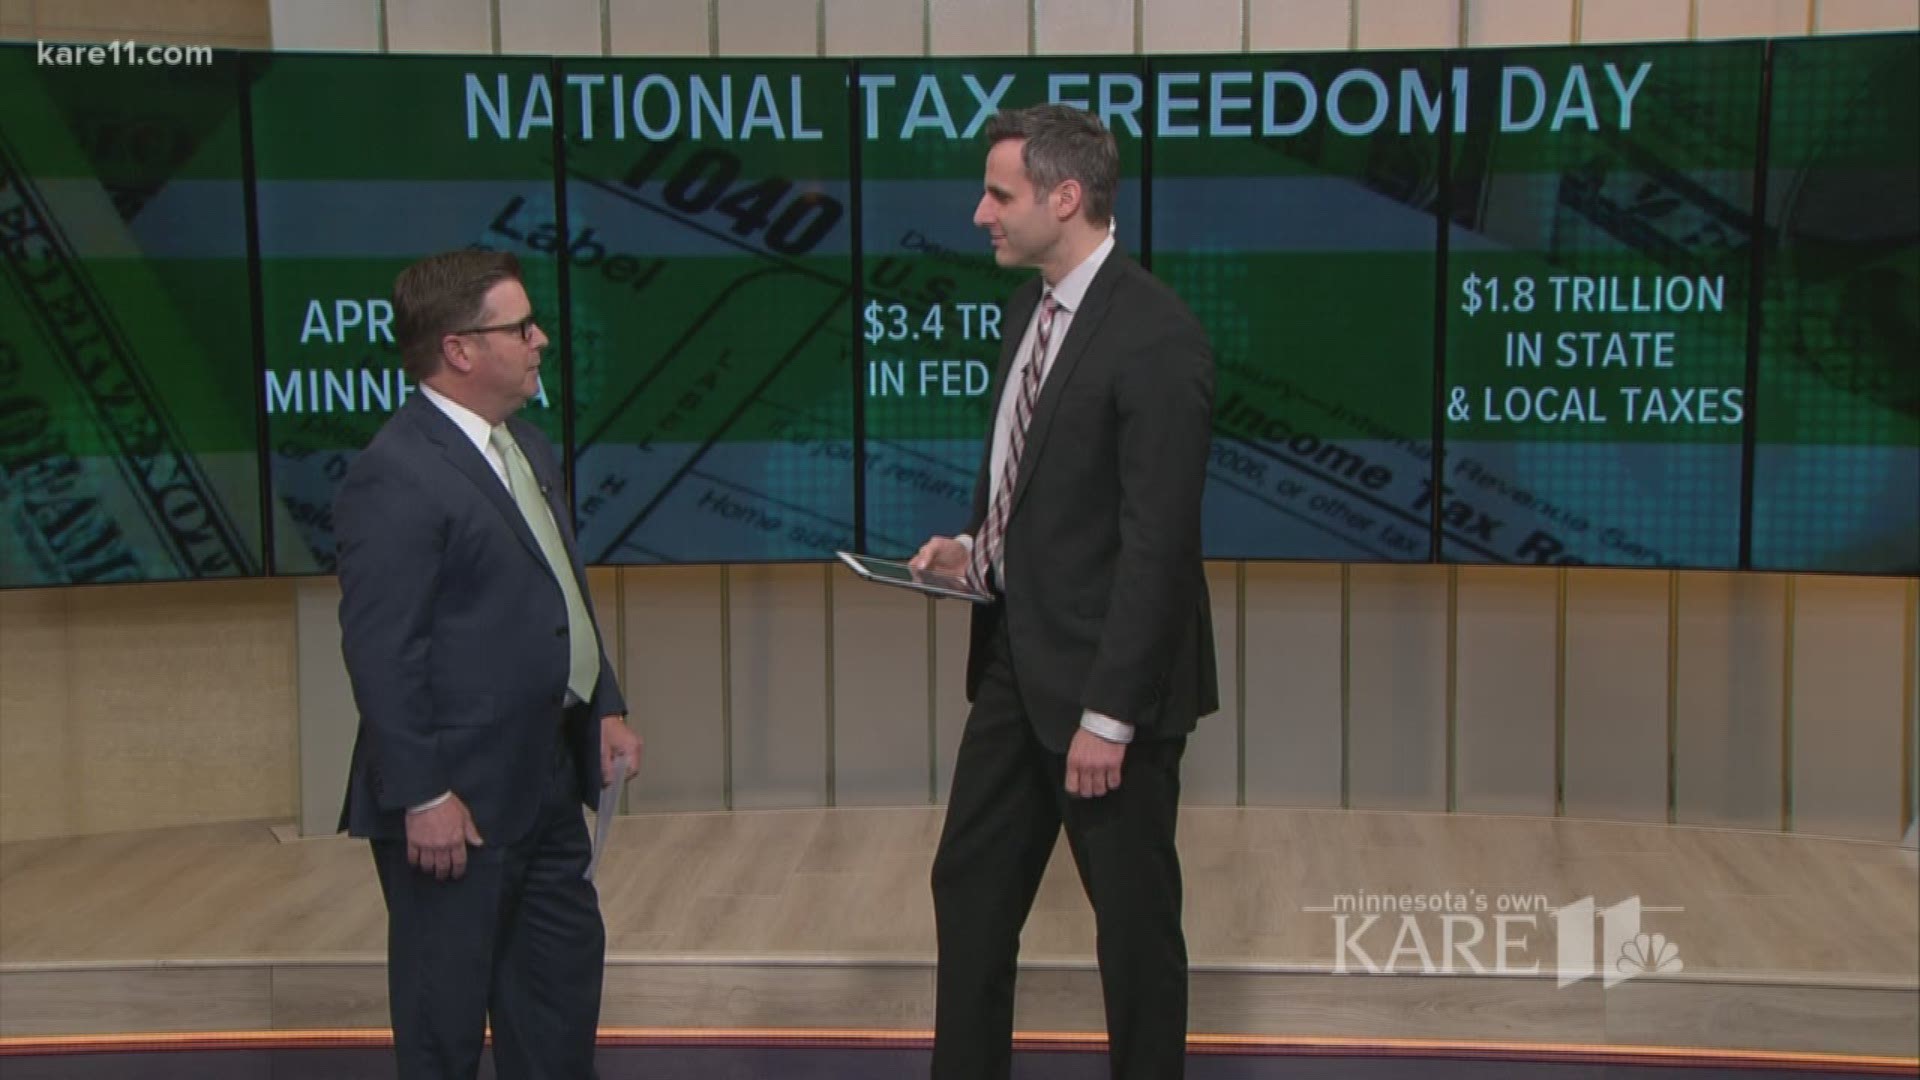 Ever heard of Tax Freedom Day? It's not what it sounds like. Dan Ament stopped by KARE 11 Sunrise to explain: https://kare11.tv/2qG0Dly